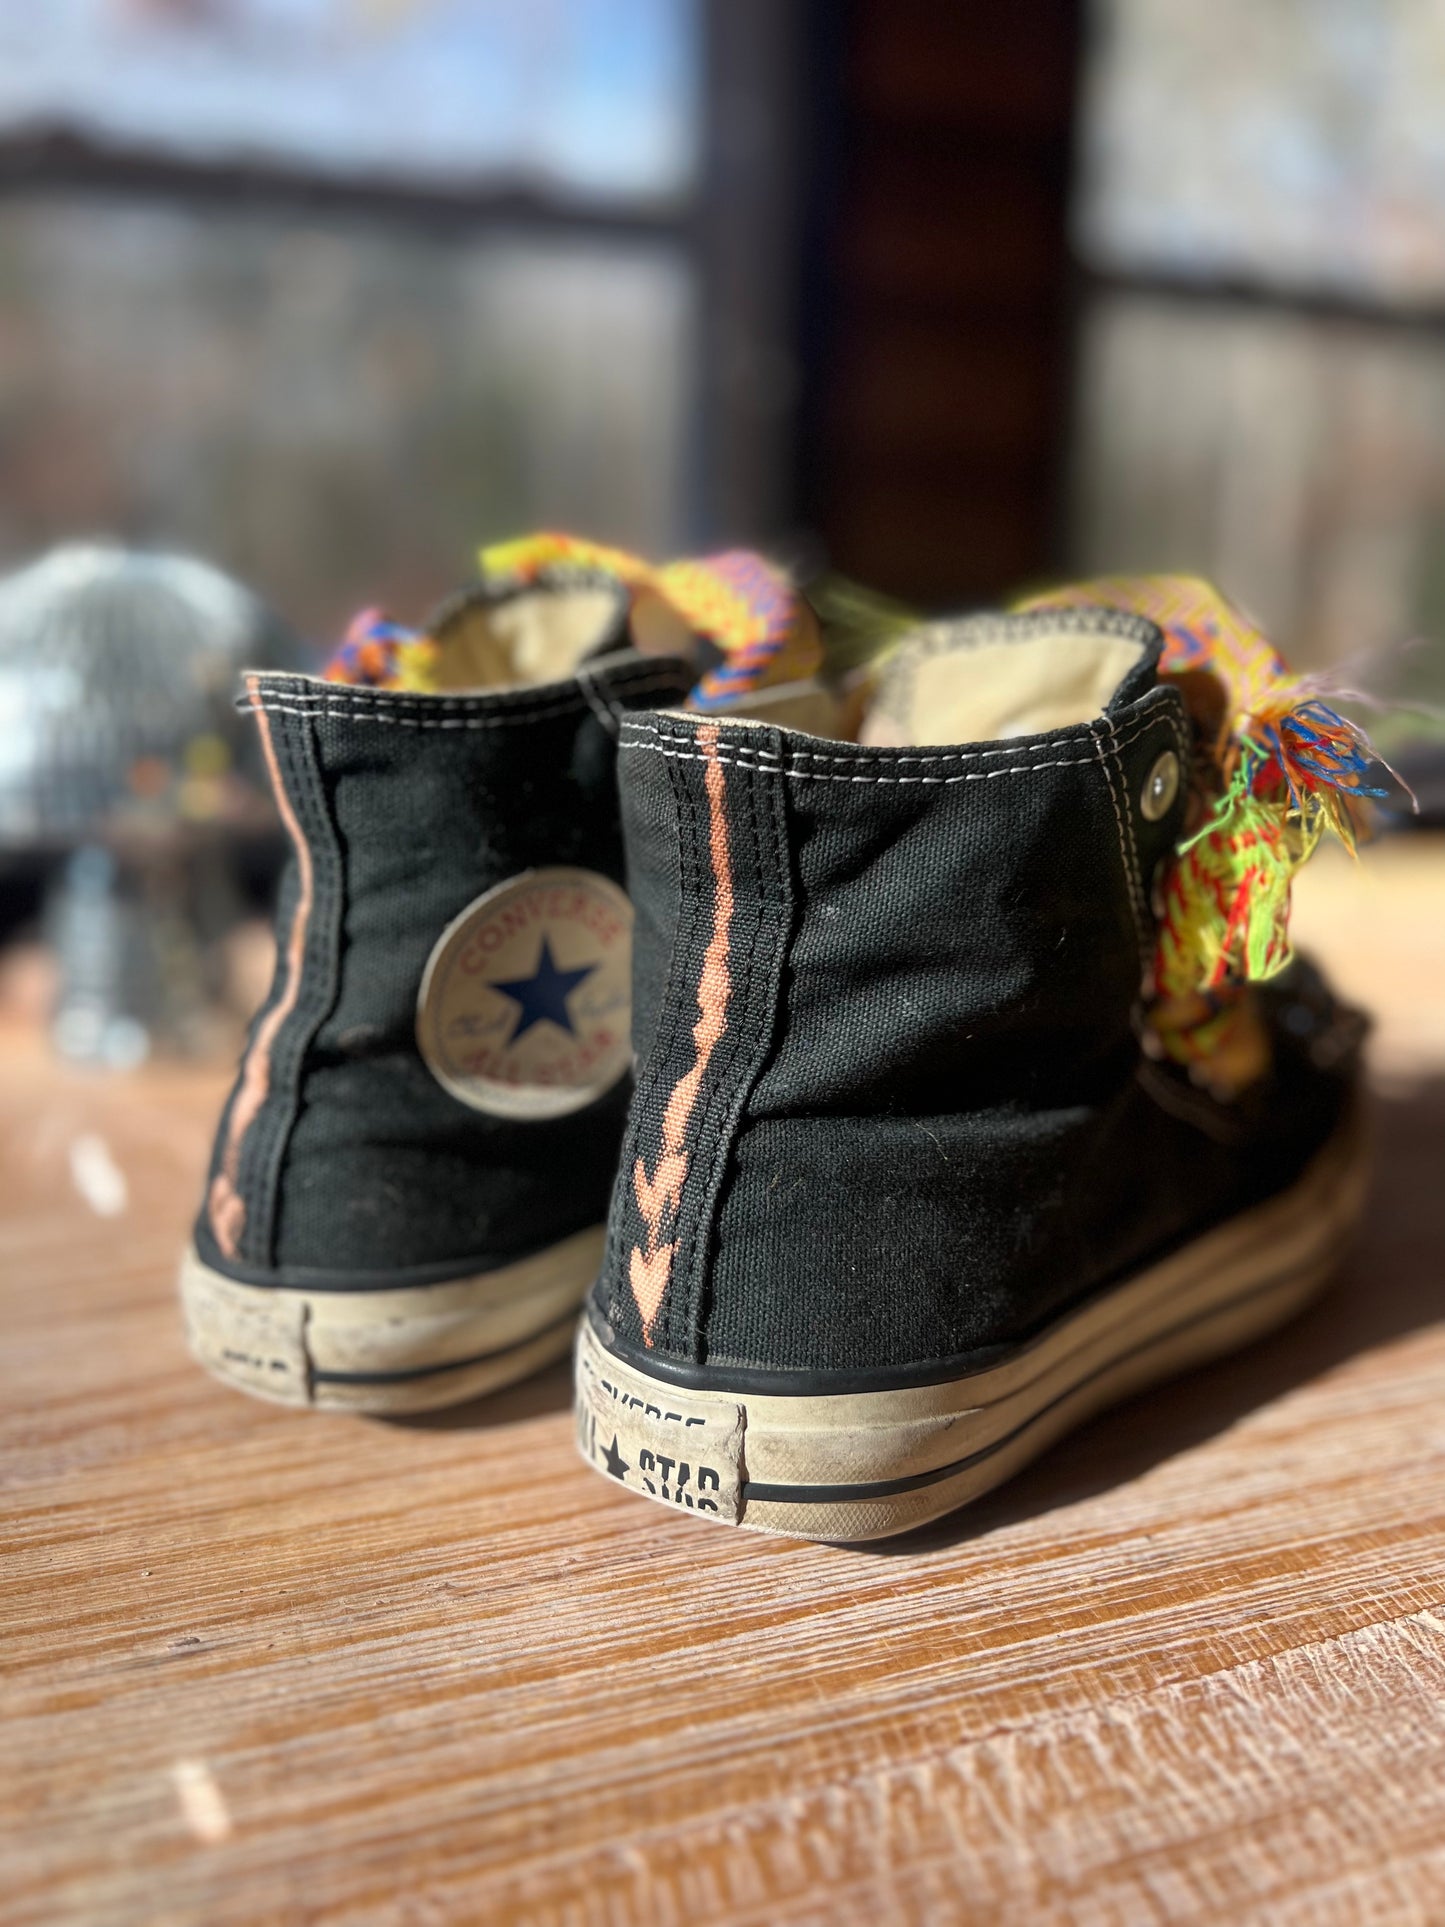 Custom Victorious Sneaks. Re-done by hand.